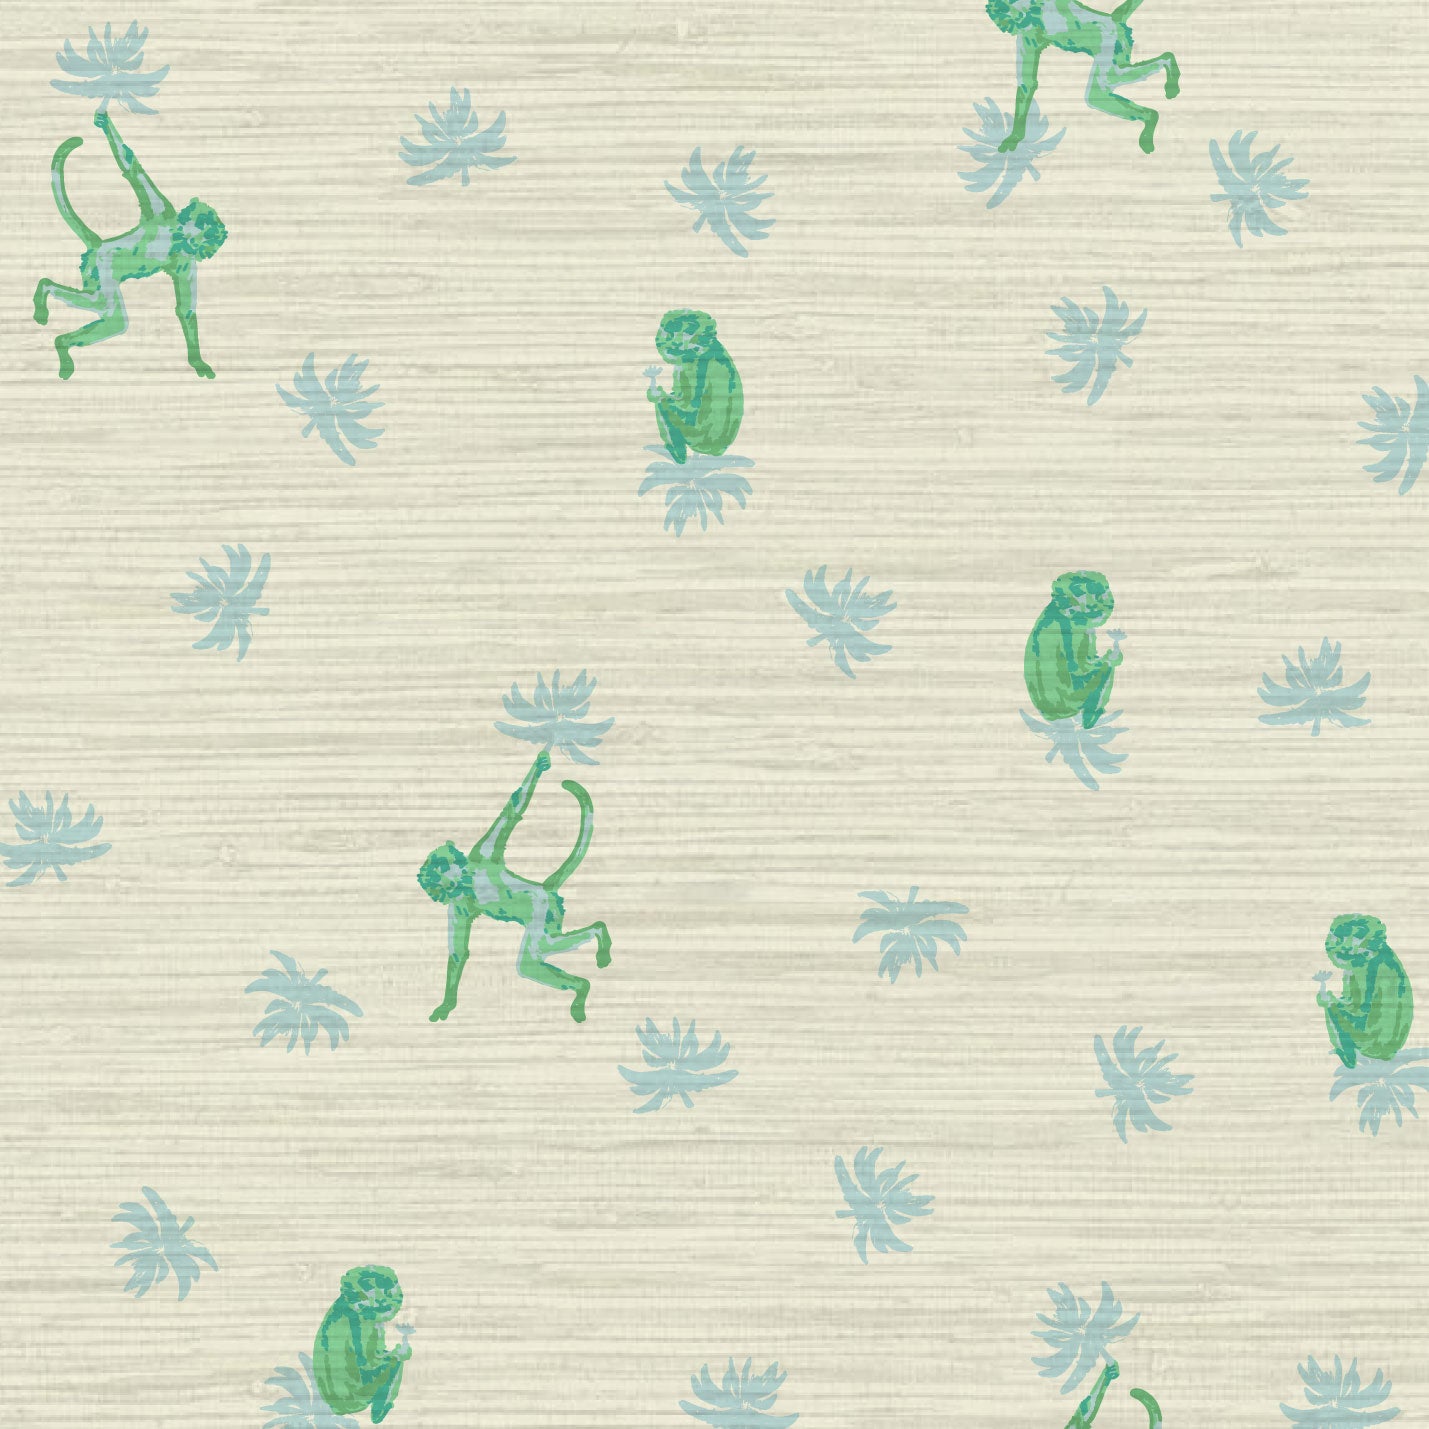 Grasscloth wallpaper Natural Textured Eco-Friendly Non-toxic High-quality Sustainable Interior Design Bold Custom Tailor-made Retro chic Grandmillennial Maximalism Traditional Dopamine decor tropical jungle kid playroom animal monkey chintz chinoiserie preppy playroom nursery bathroom french blue green mint white cream neutral mini icon